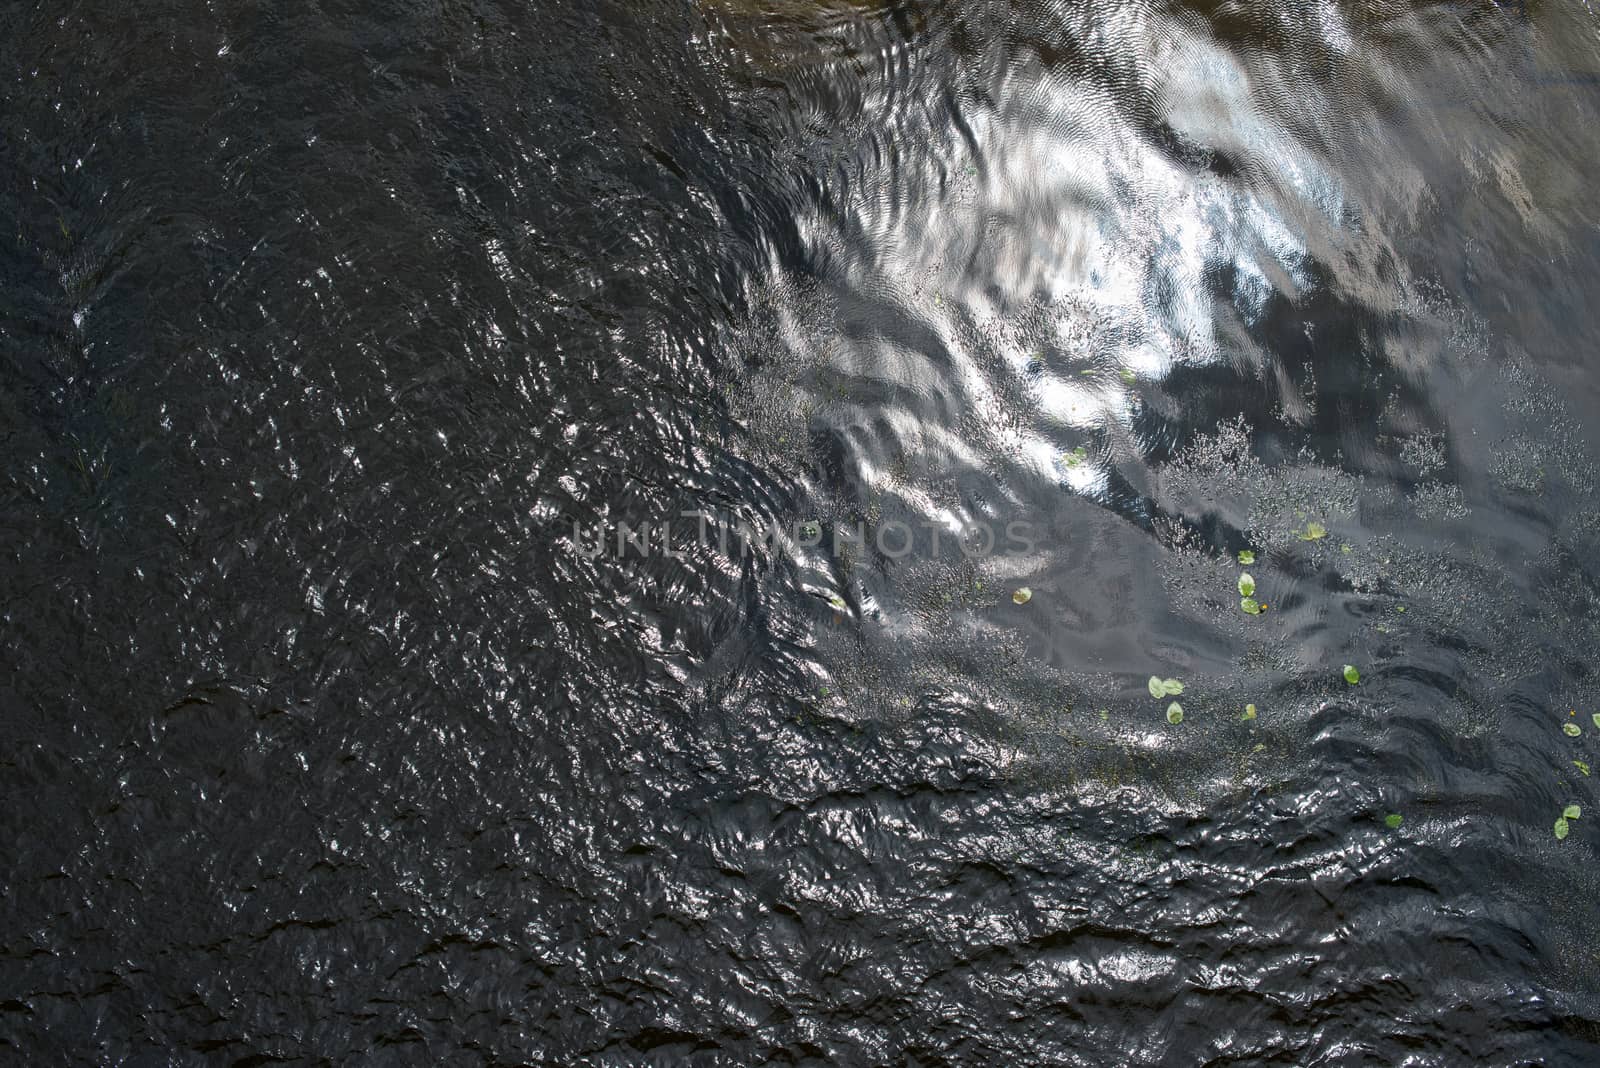 Water surface with ripples and water plants by rootstocks